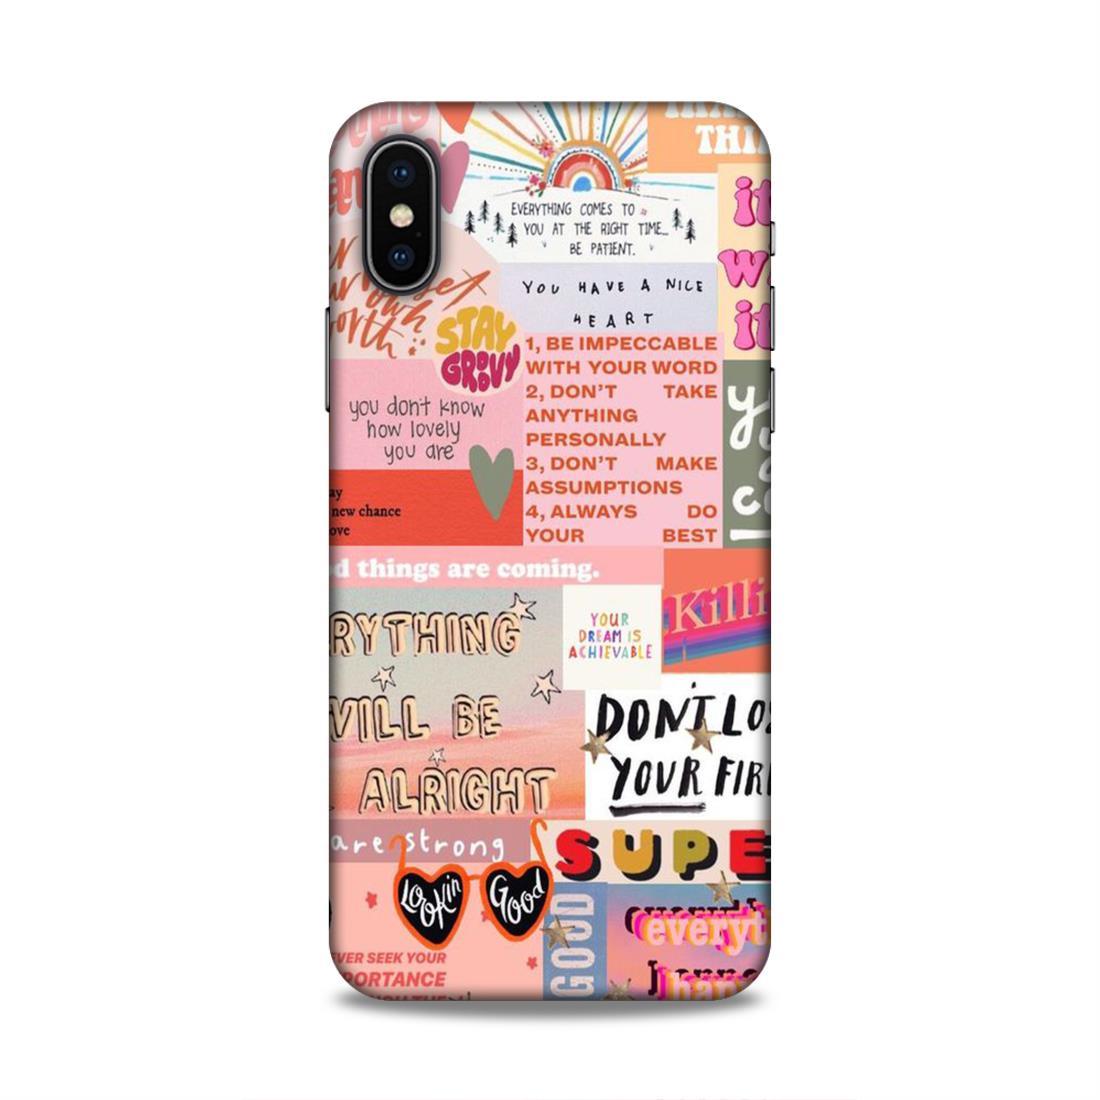 Have A Nice Heart iPhone X Phone Cover Case